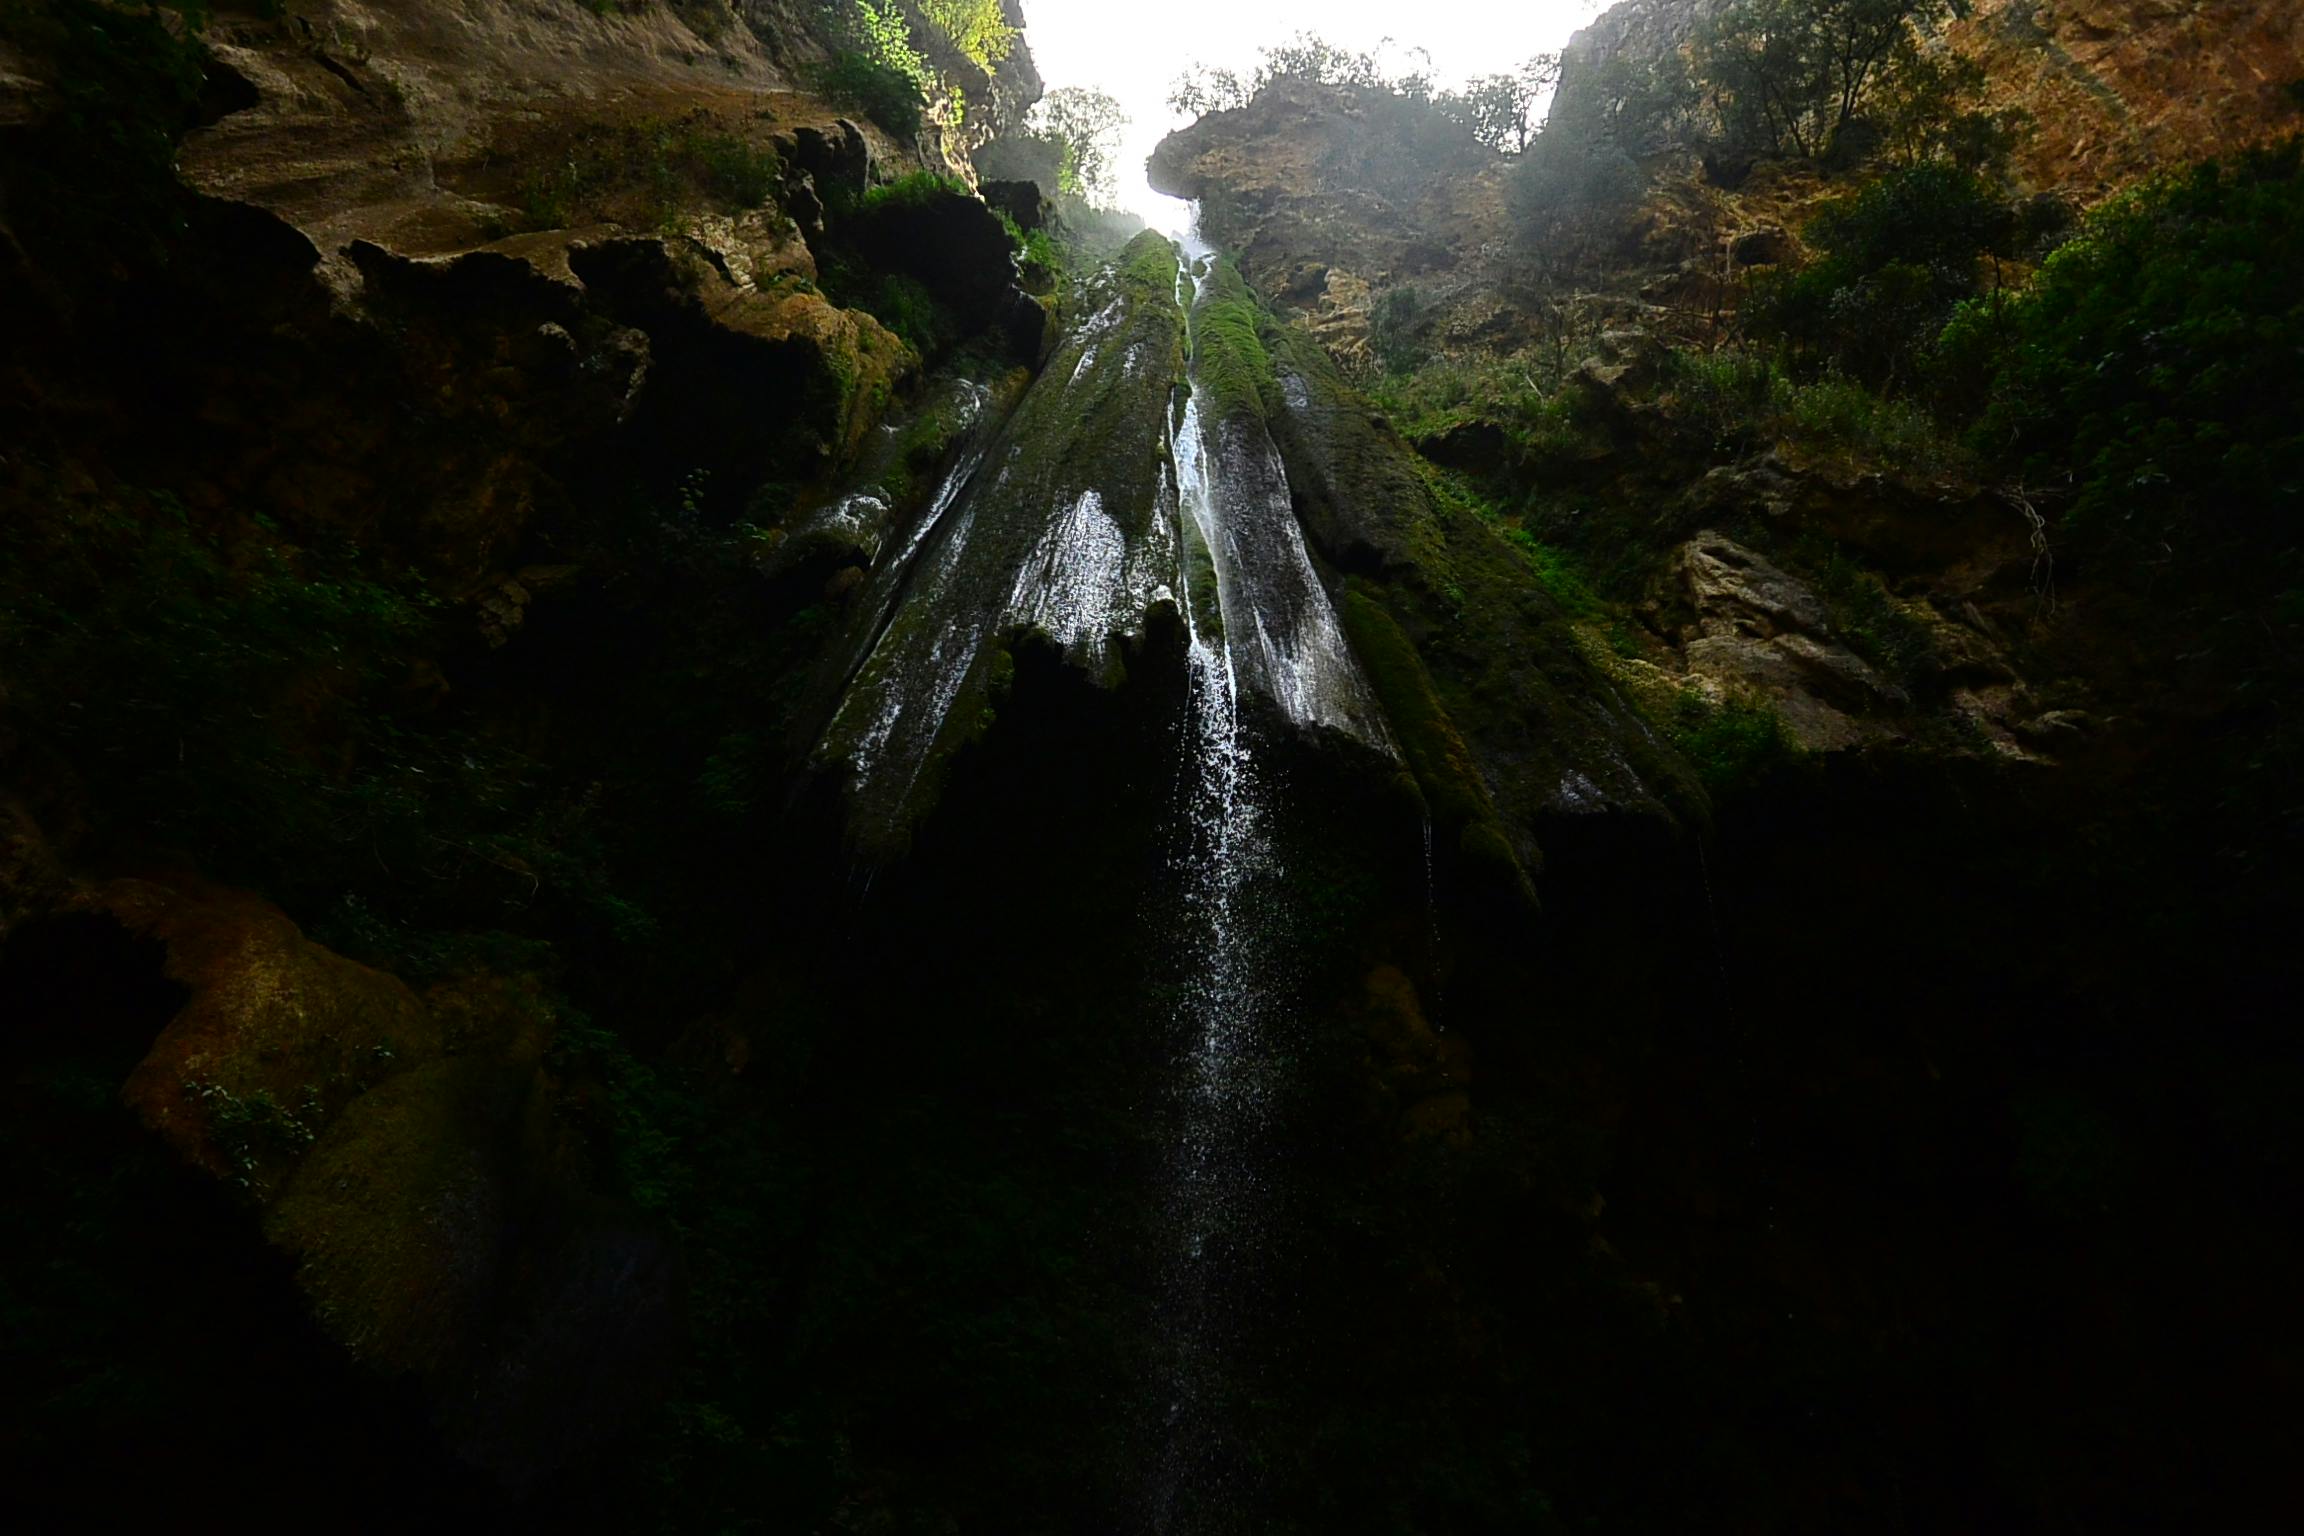 there is a waterfall coming out of a cave, les nabis, light from above, the lost valley, highly upvoted, high quality photos